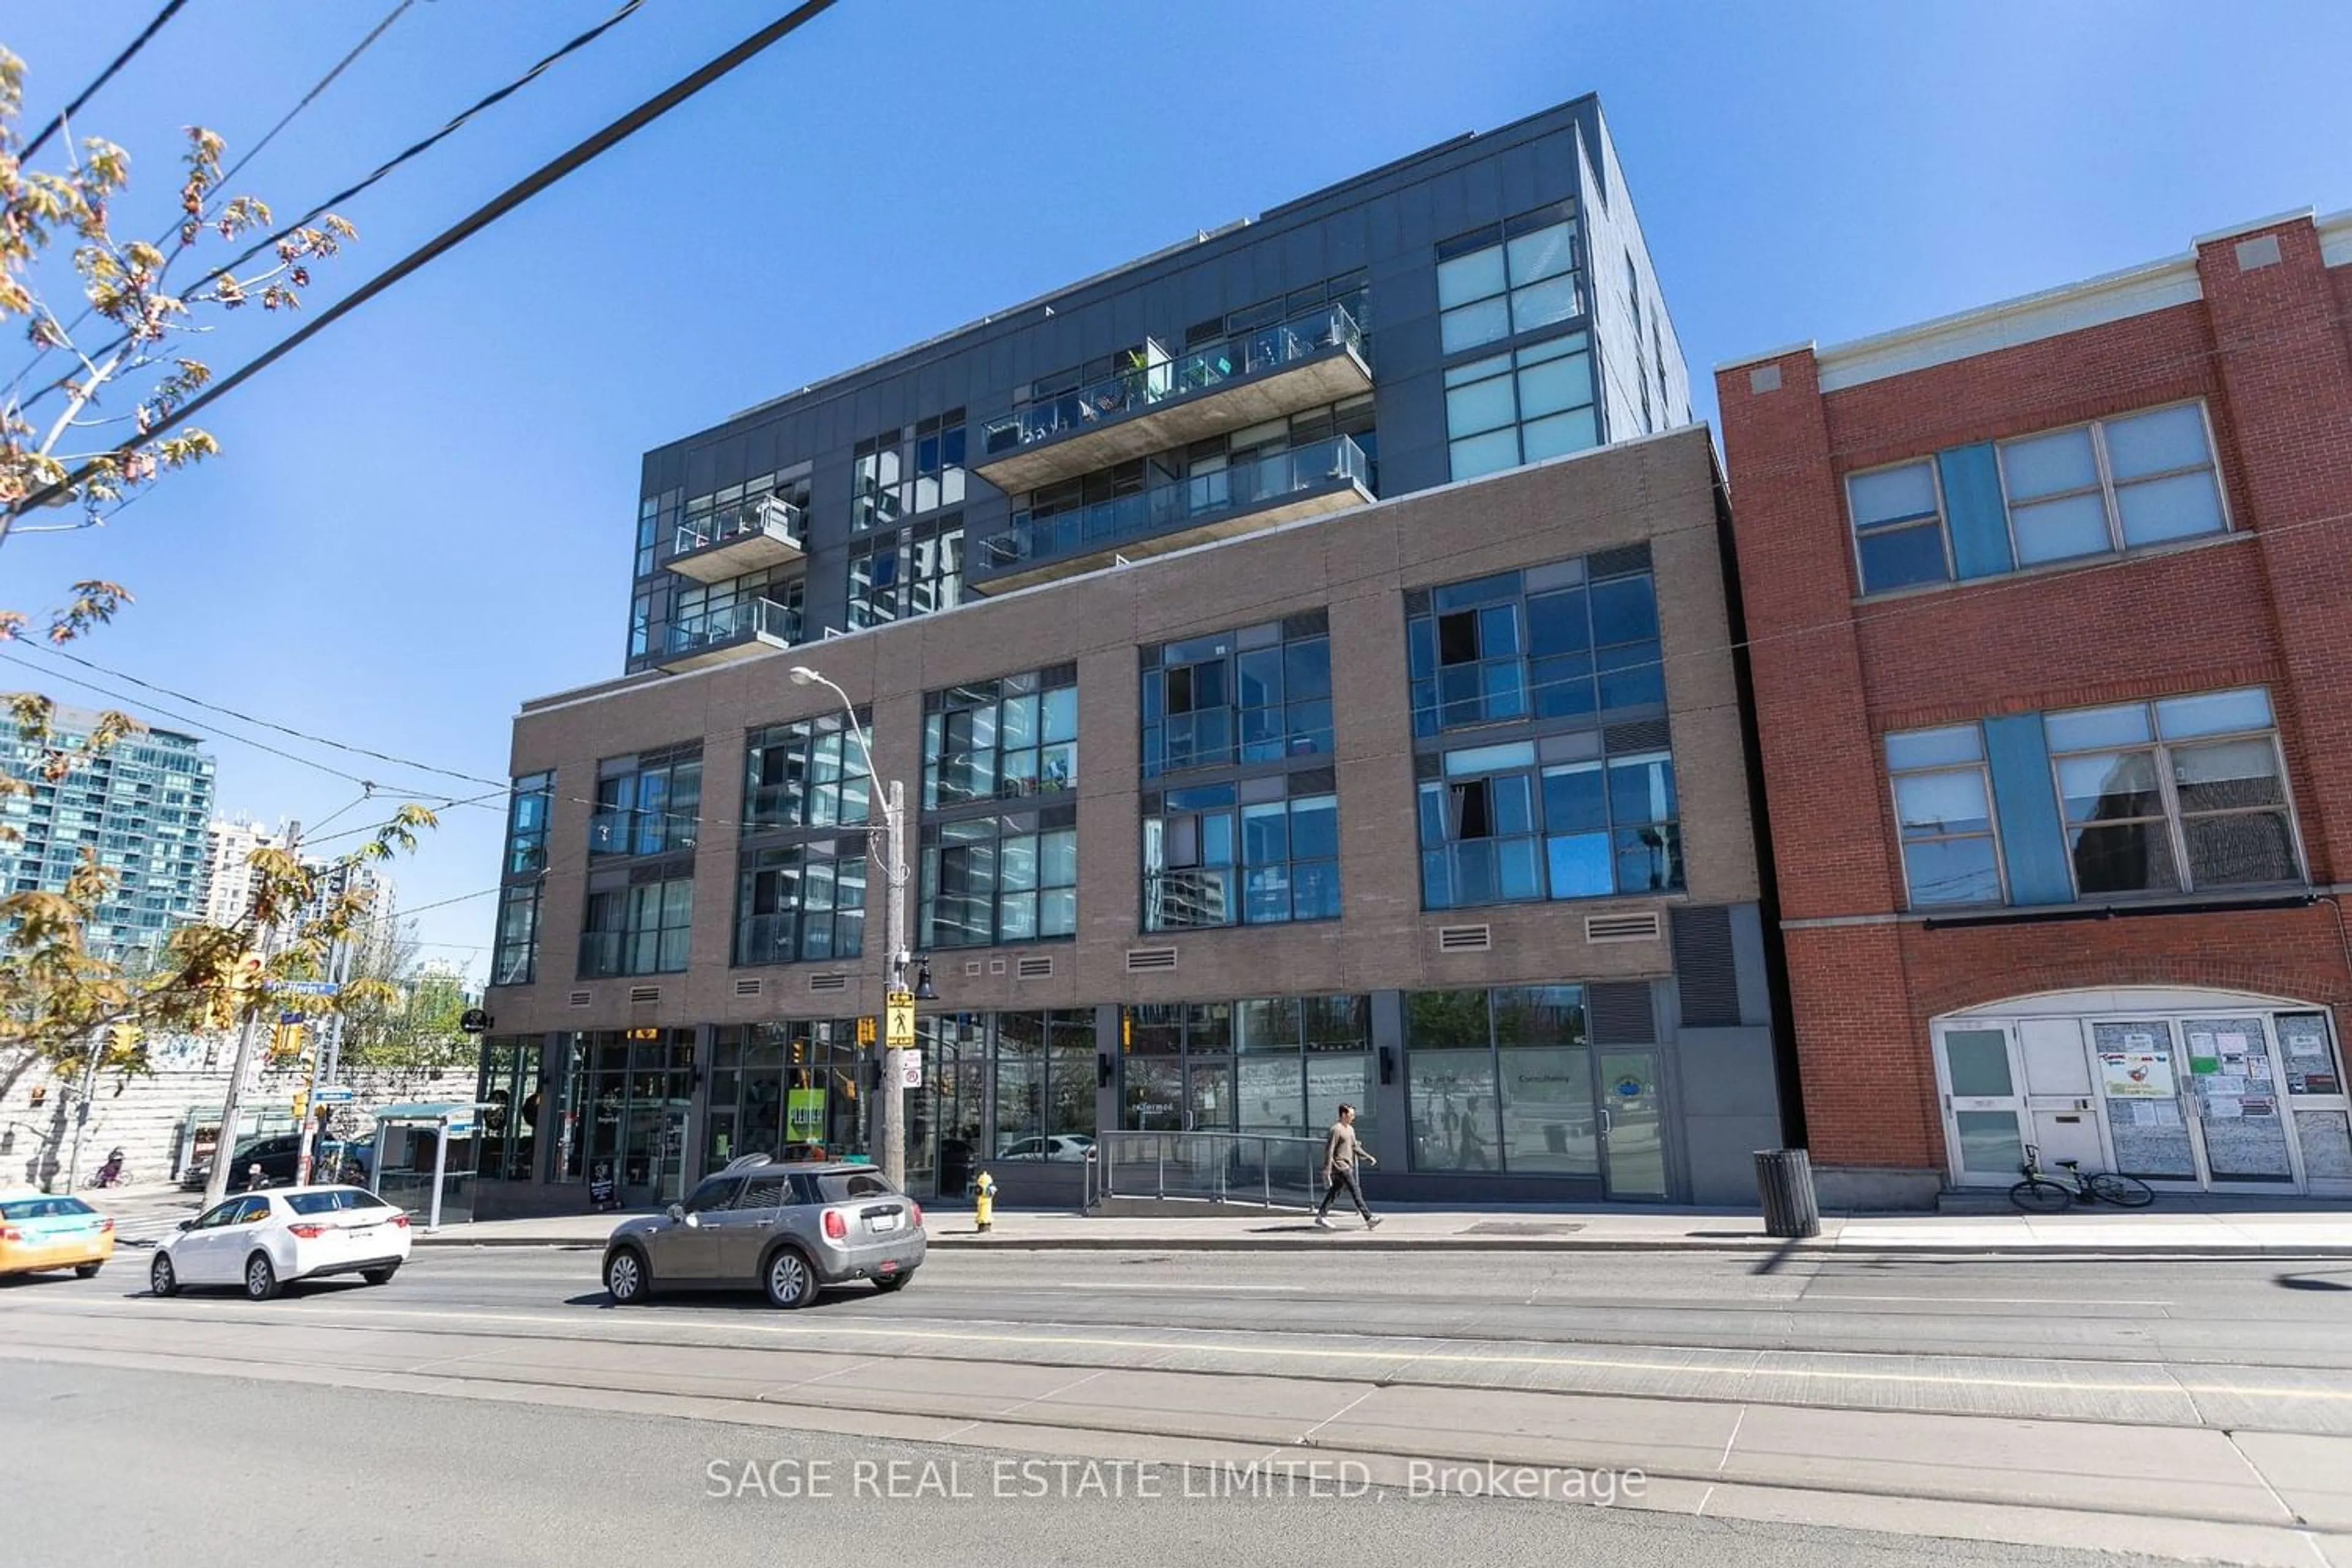 A pic from exterior of the house or condo for 1205 Queen St #209, Toronto Ontario M6K 0B9